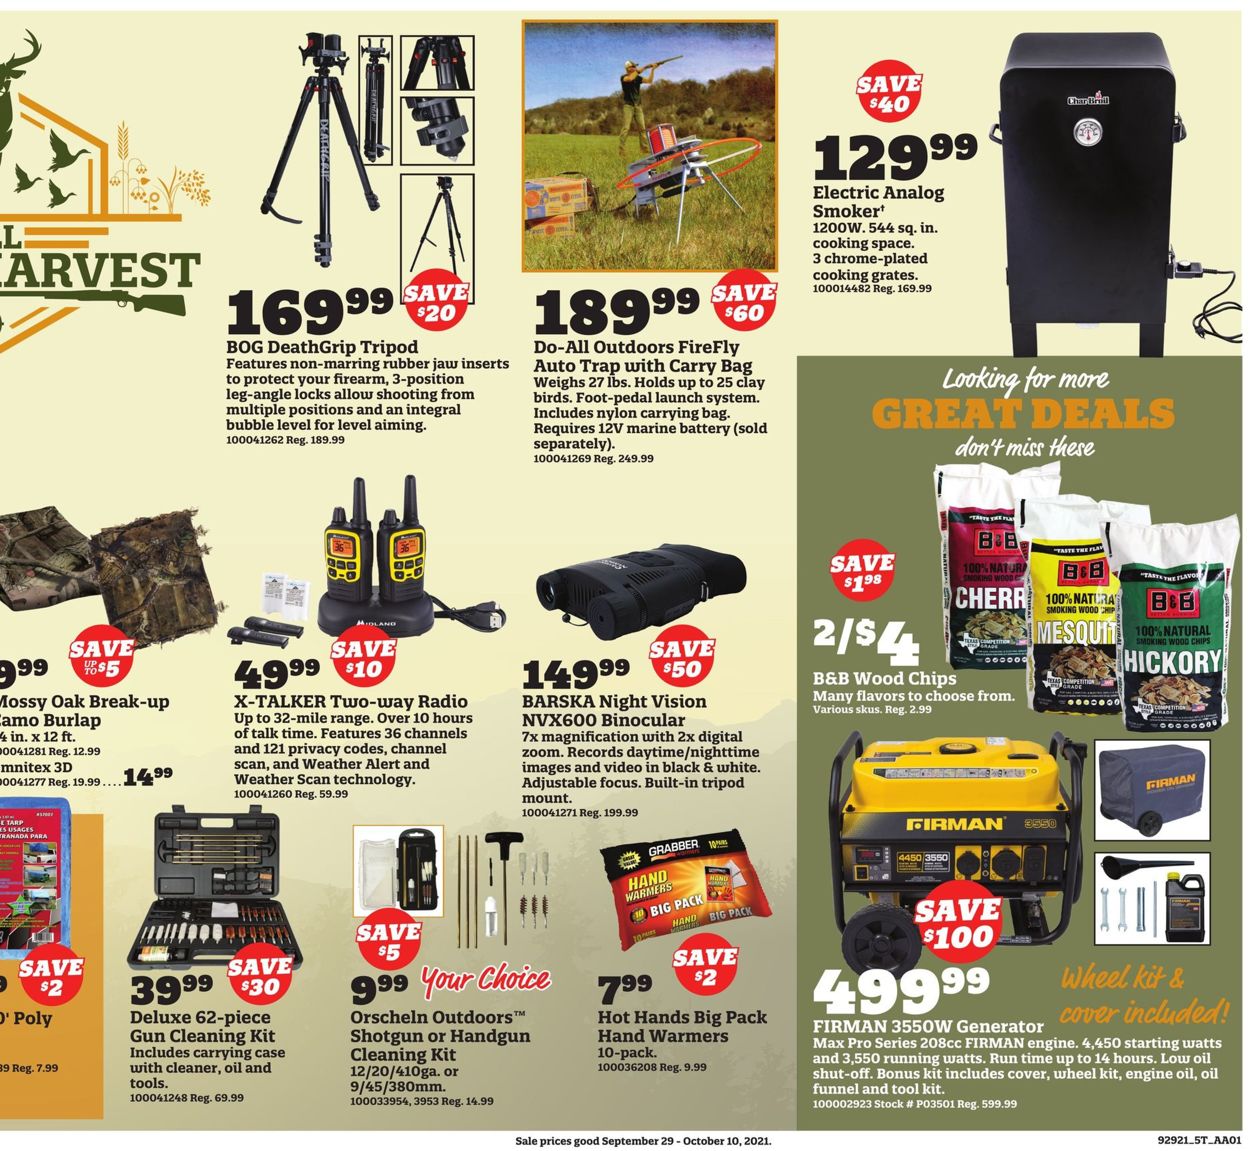 Orscheln Farm and Home Ad from 09/29/2021